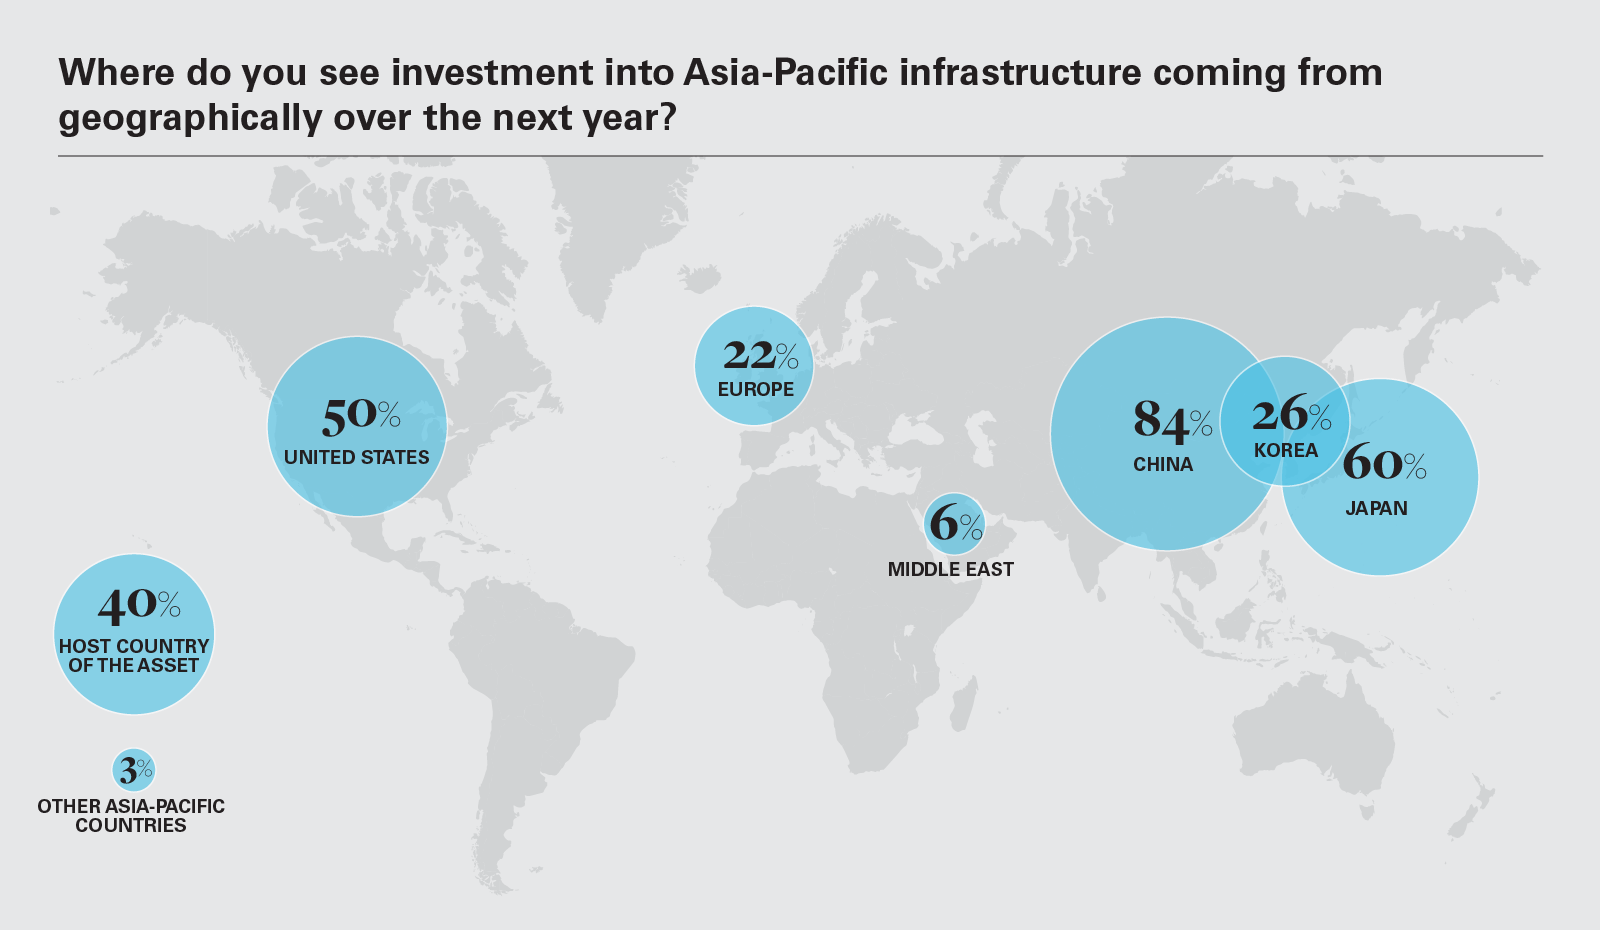 Where do you see investment into Asia-Pacific infrastructure coming from geographically over the nextyear?